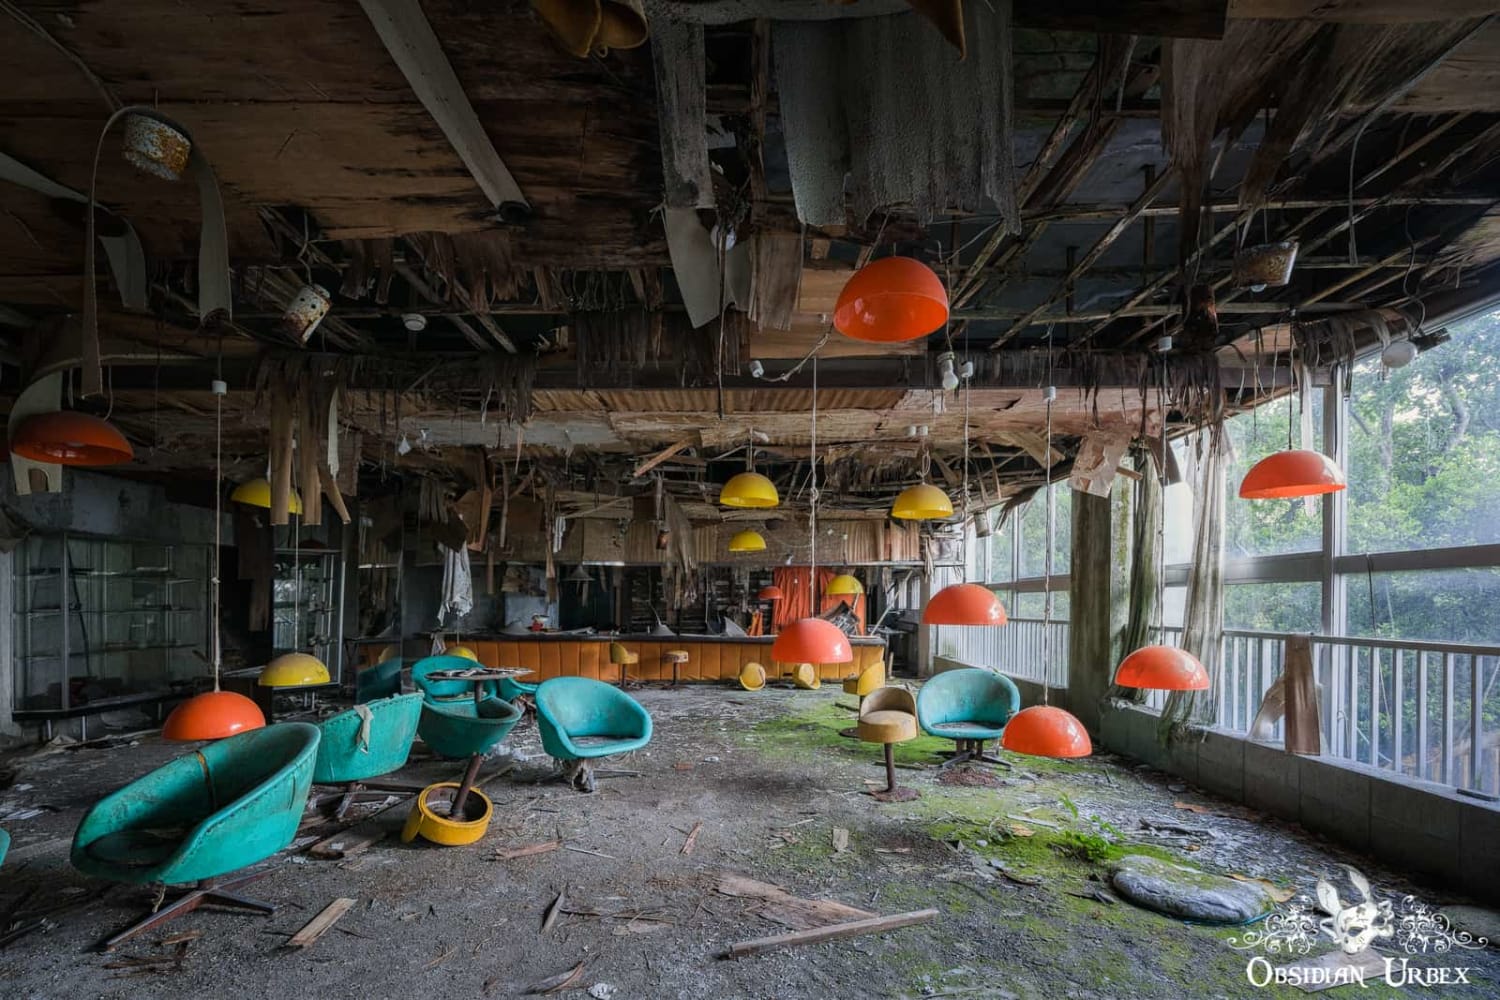 Abandoned ruins of a 1970s hotel lobby in Japan